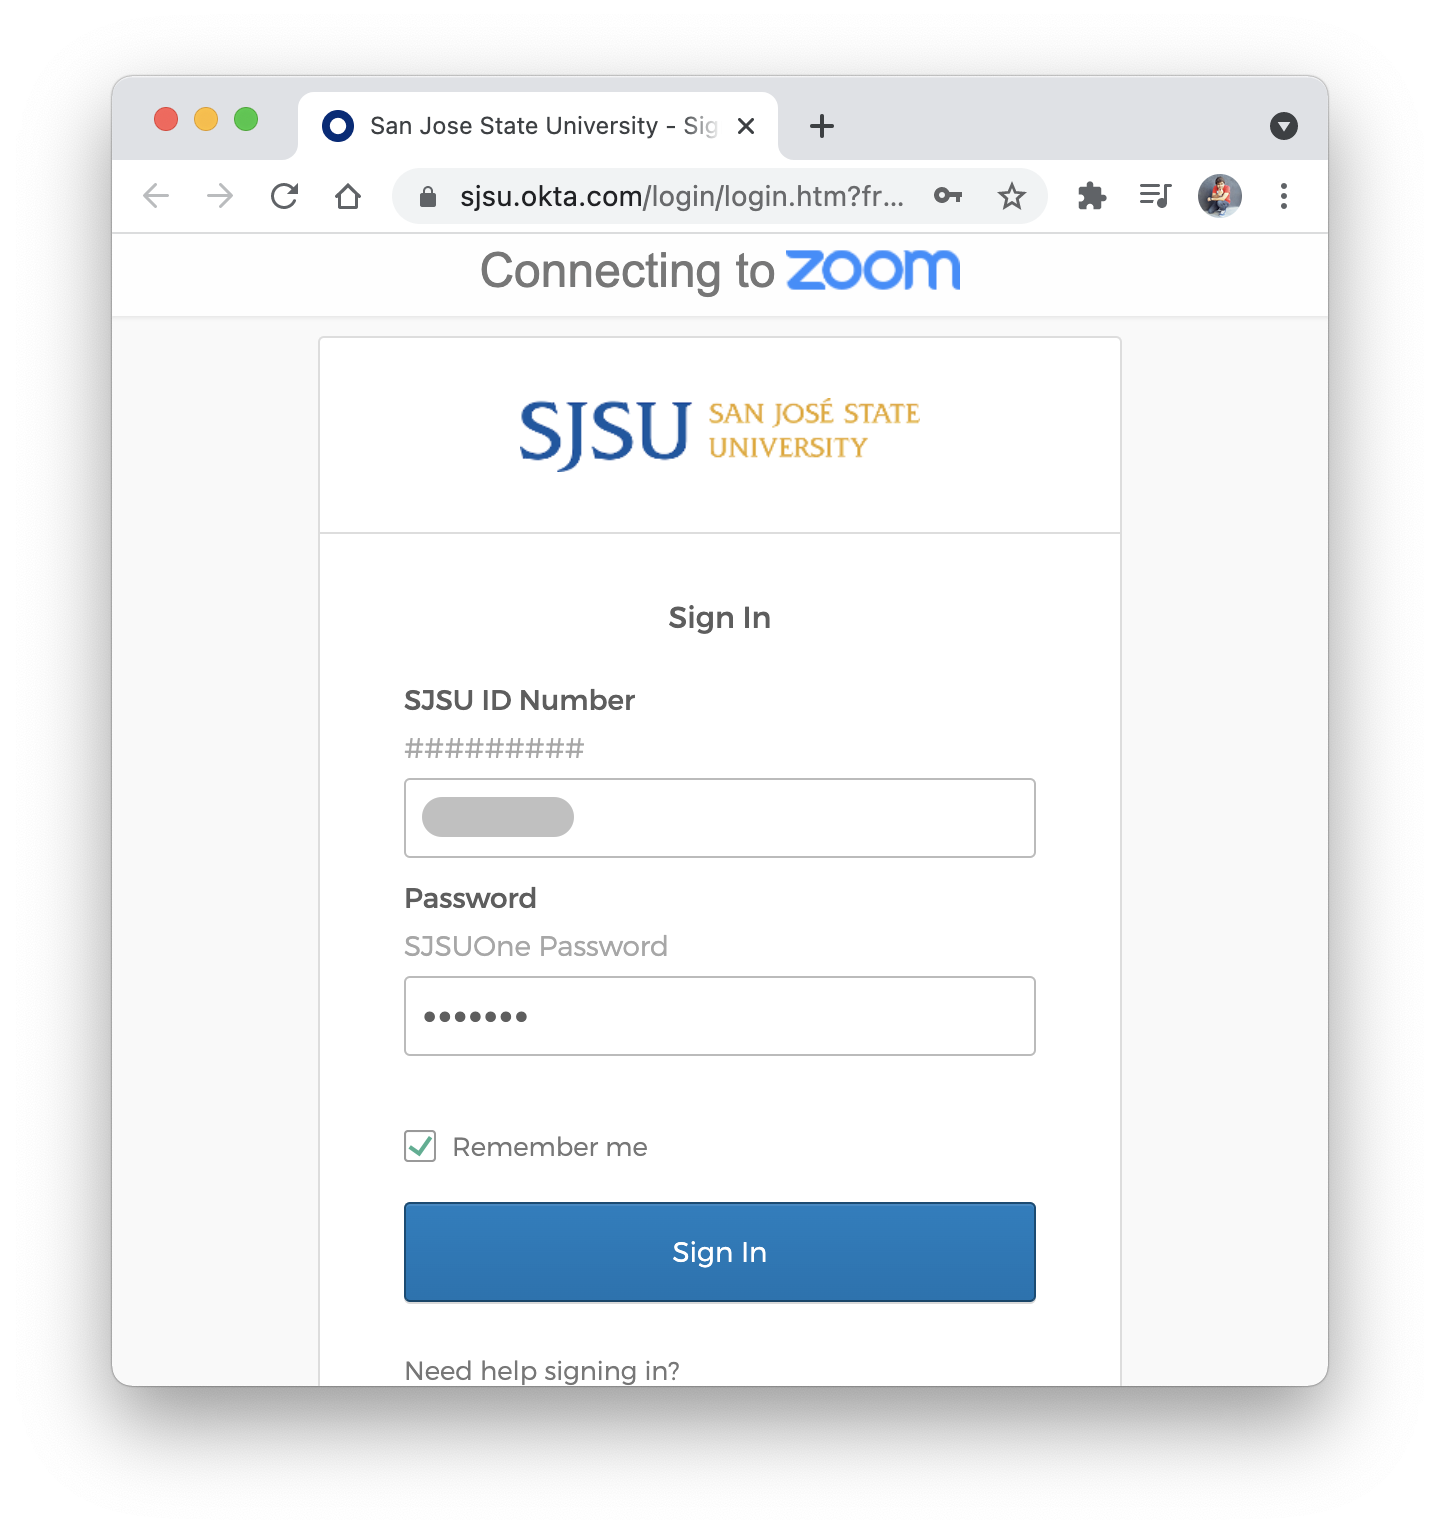 SJSU sign-in page